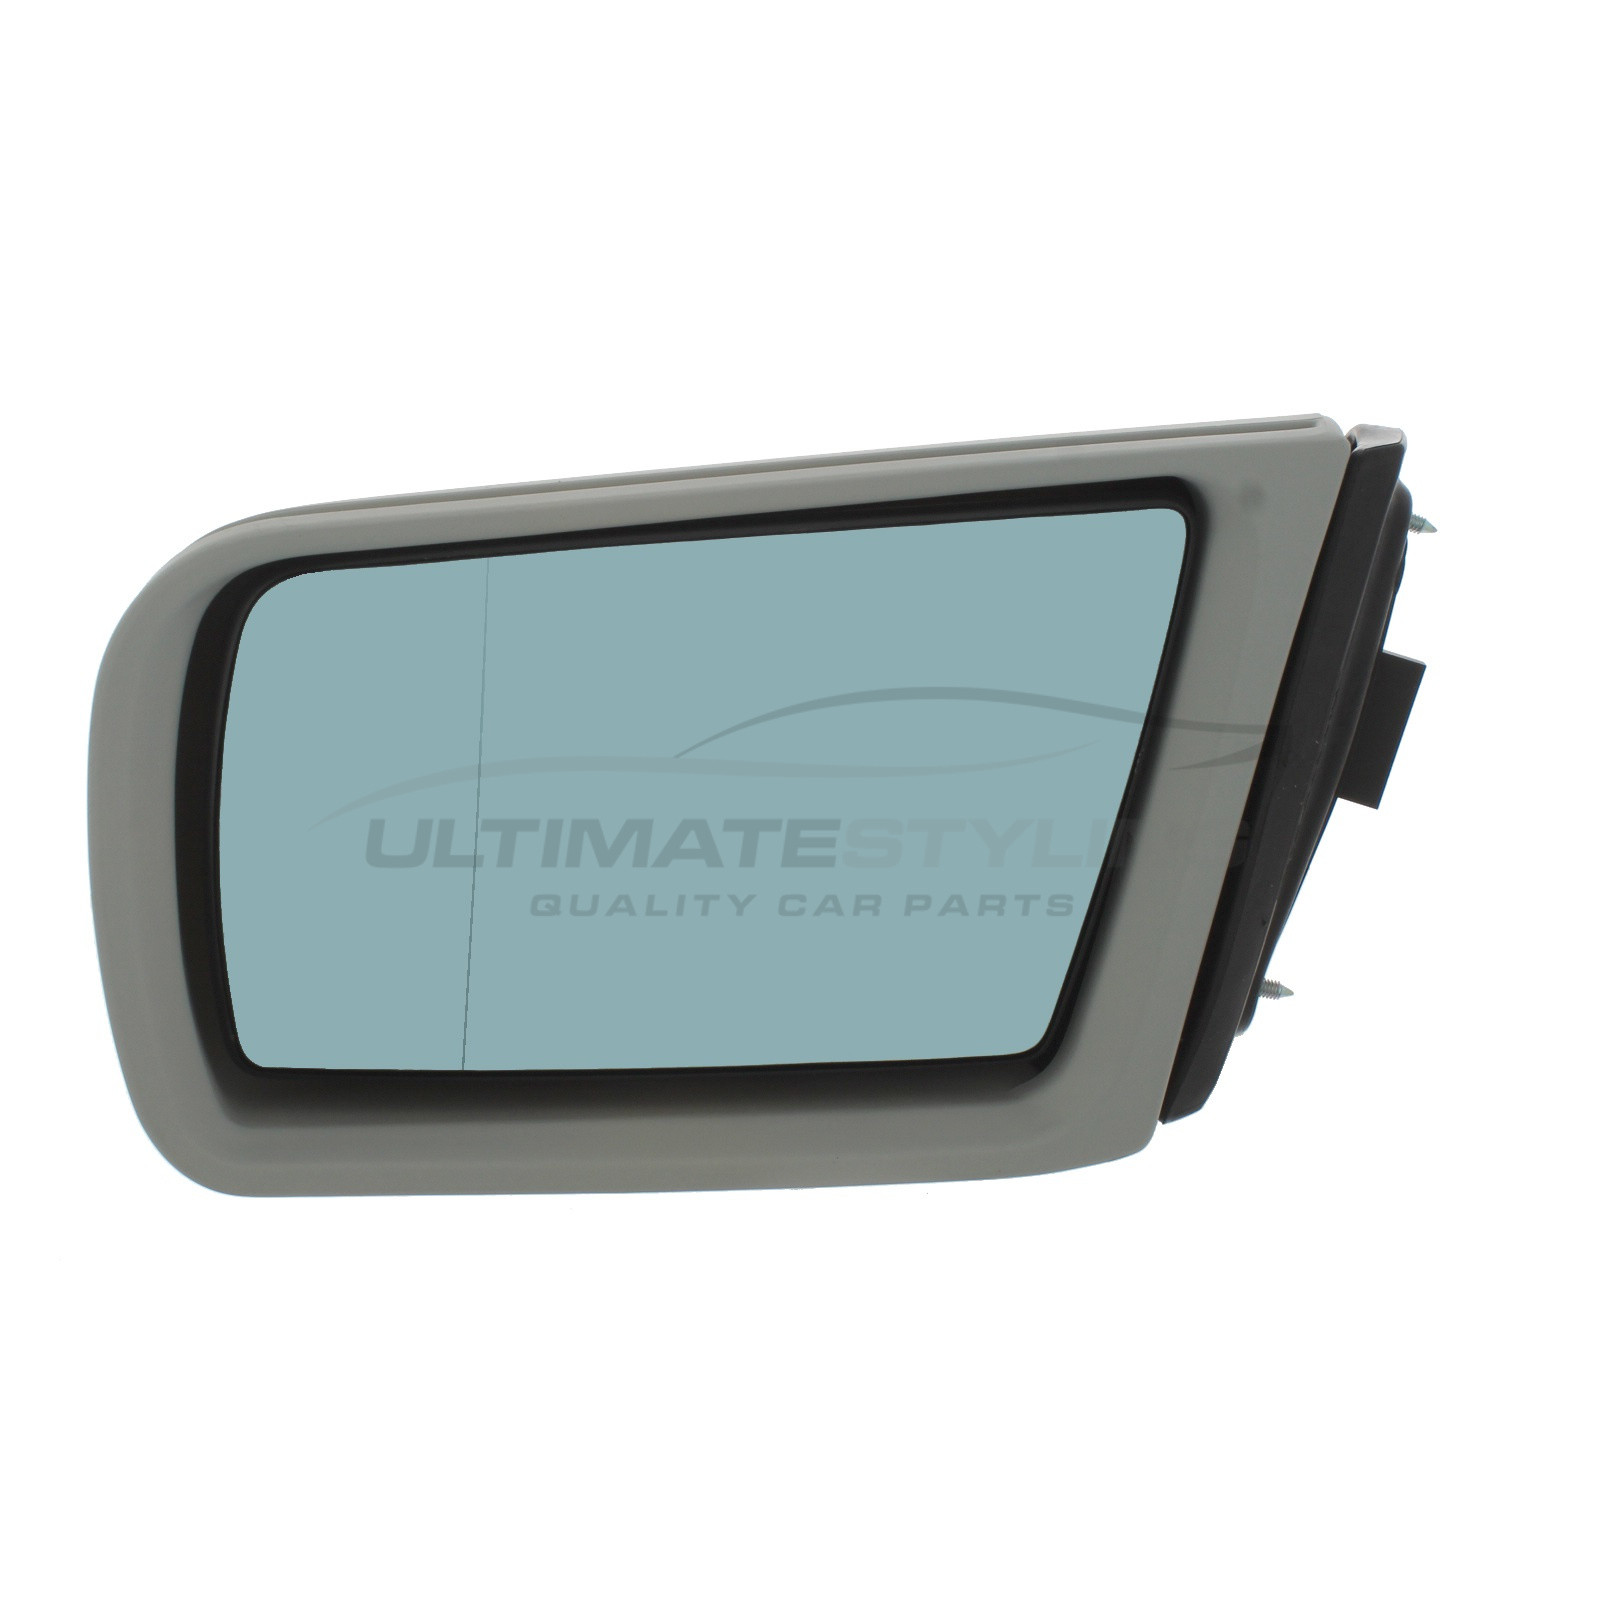 Ultimate Styling Aftermarket Replacement Wing Mirror Cover Cap Colour Of Cover Primed For Passenger Side Left Hand Side LH